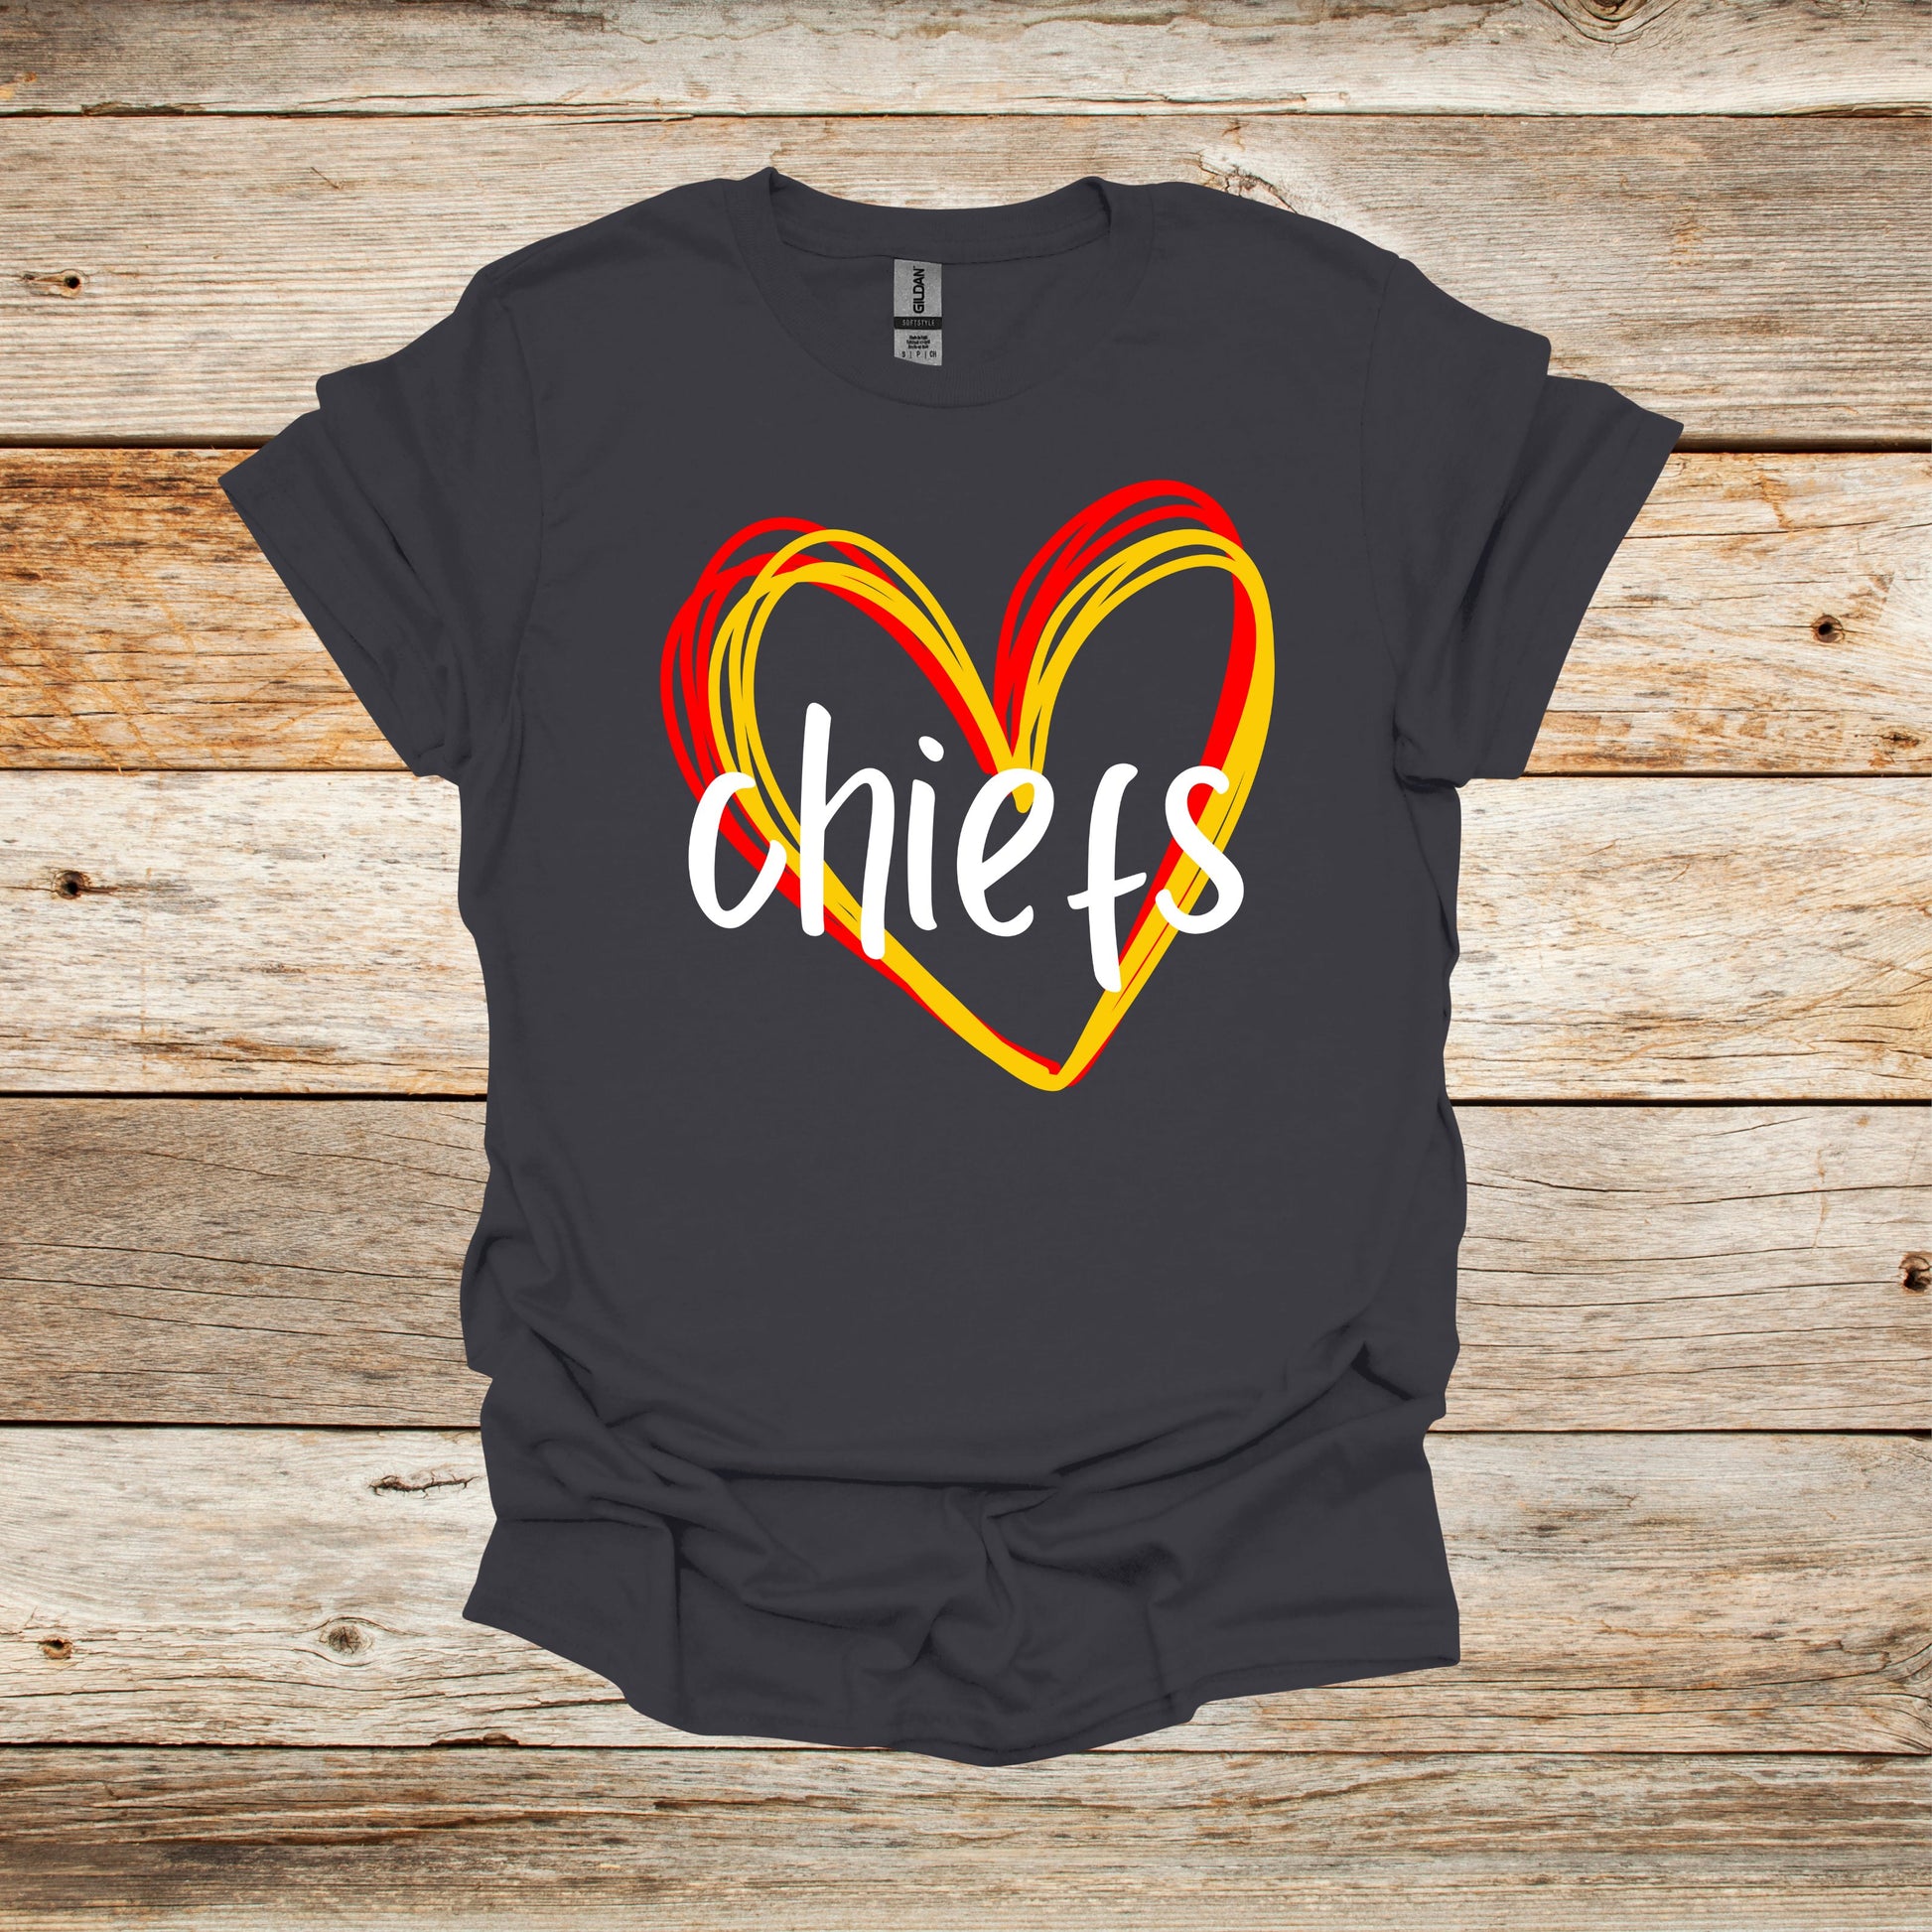 Football T-Shirt - Kansas City Chiefs - Adult and Children's Tee Shirts - Sports T-Shirts Graphic Avenue Charcoal Adult Small 